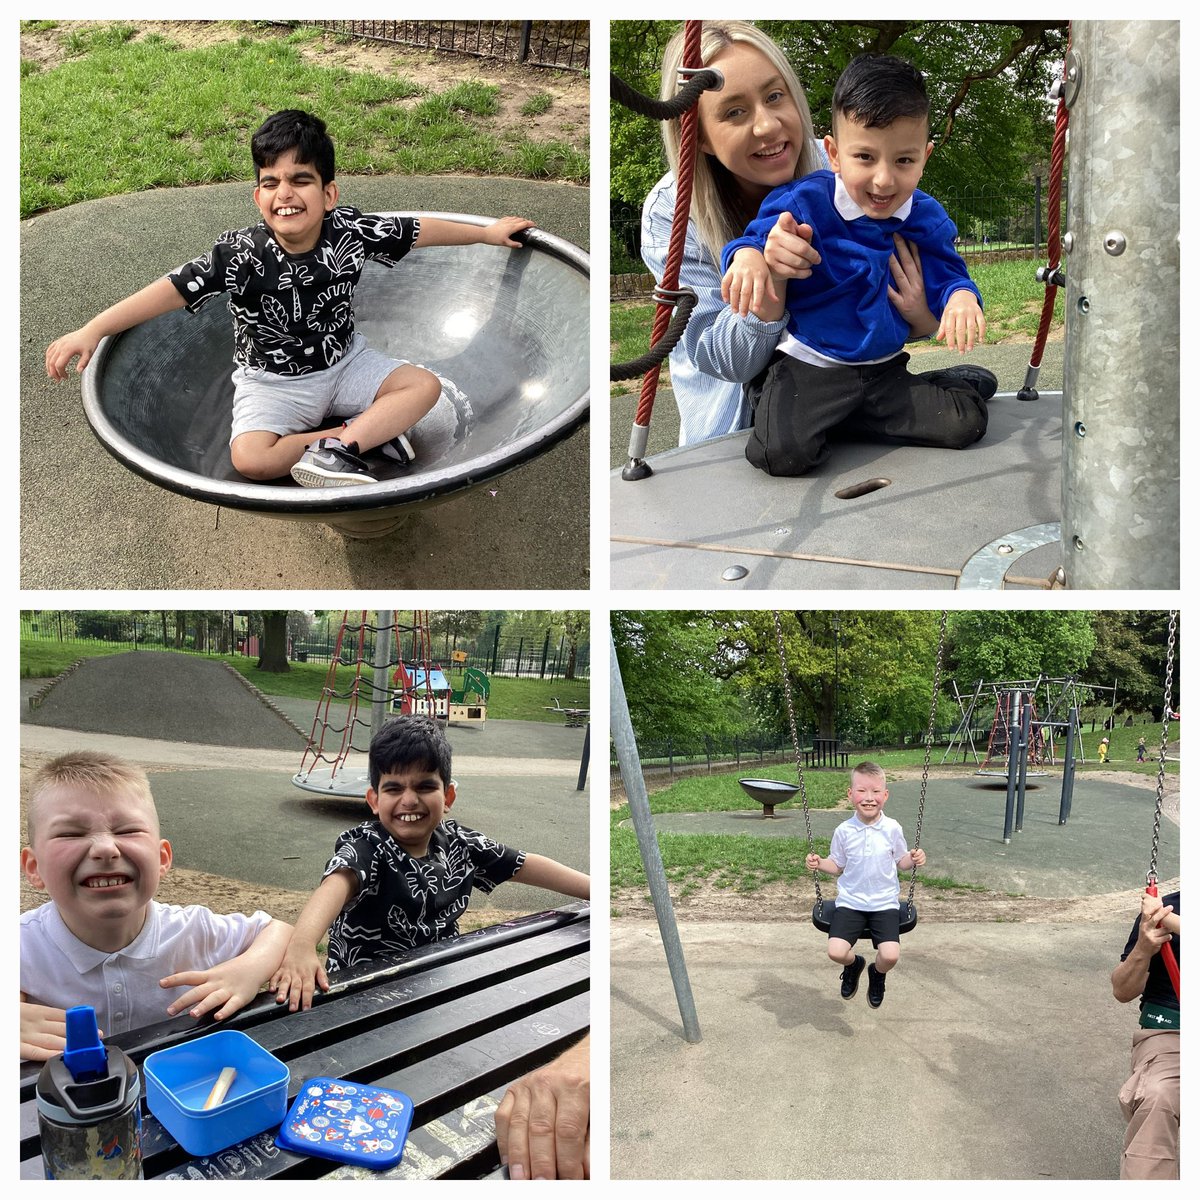 More fun in the sun for Rainbow class who had a great time at our local park 🌞🤩 #Fun #Relationships #LocalCommunity